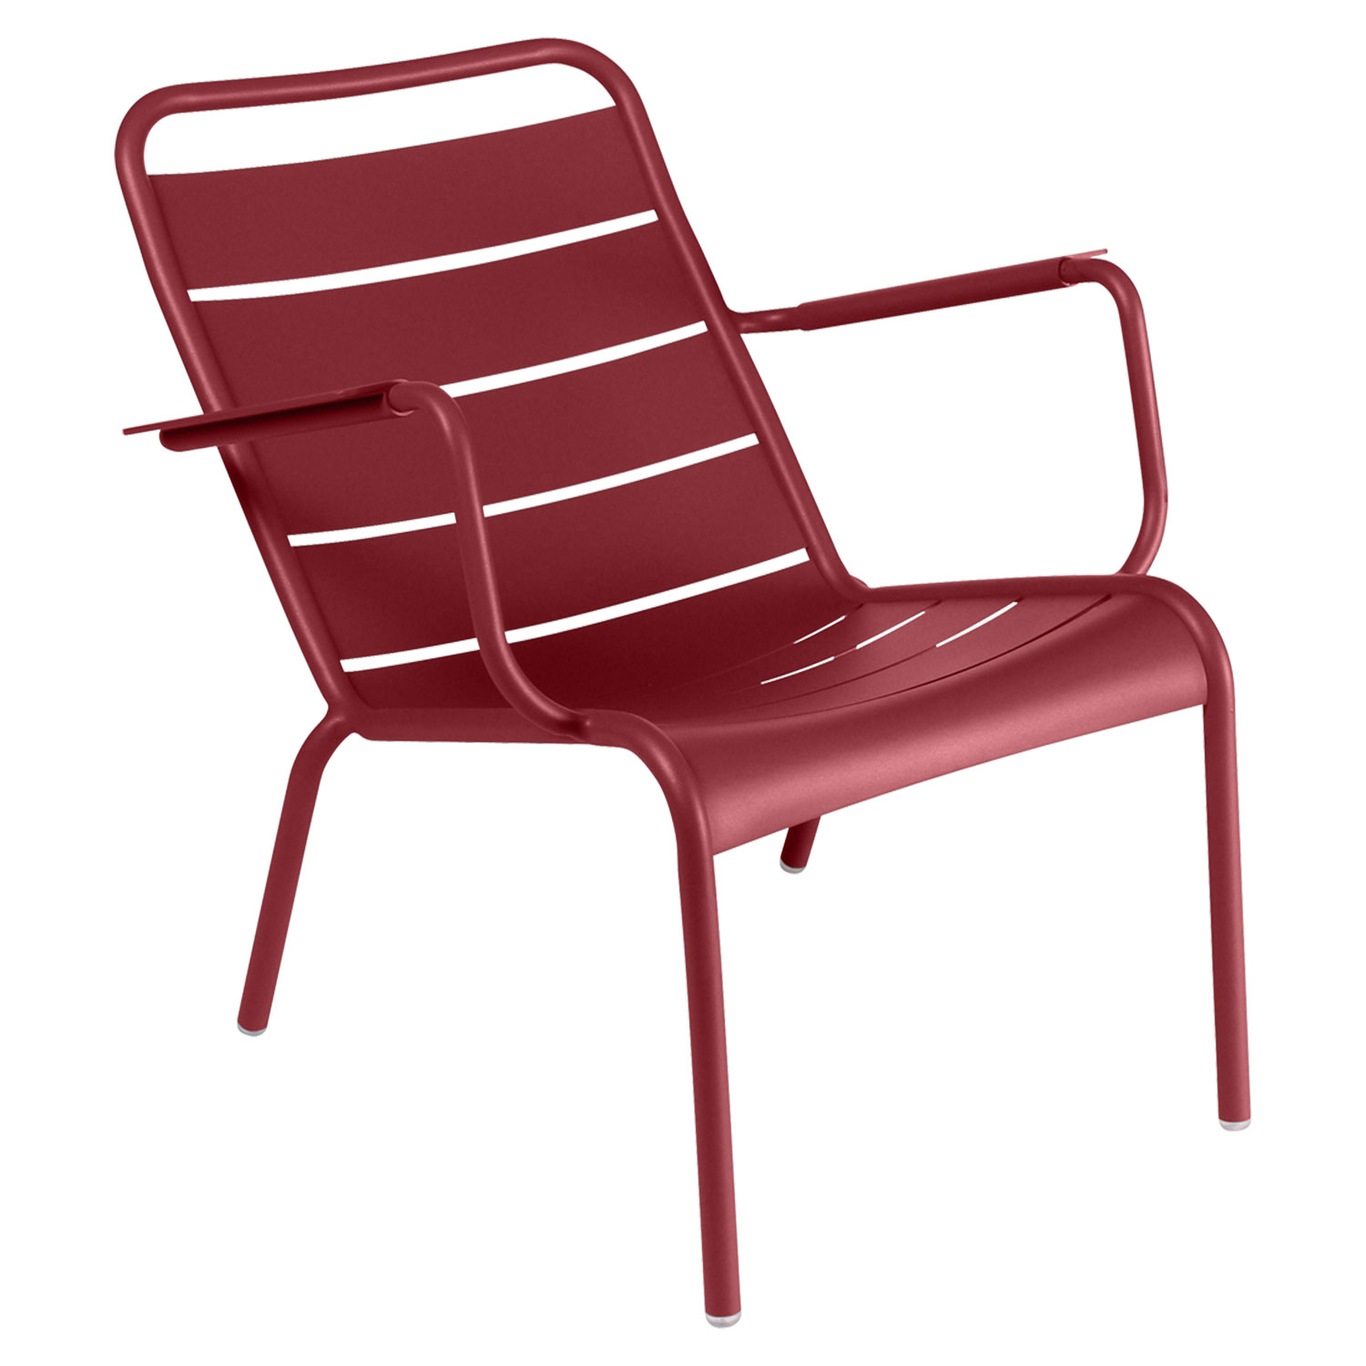 Luxembourg Fauteuil Laag, Chili